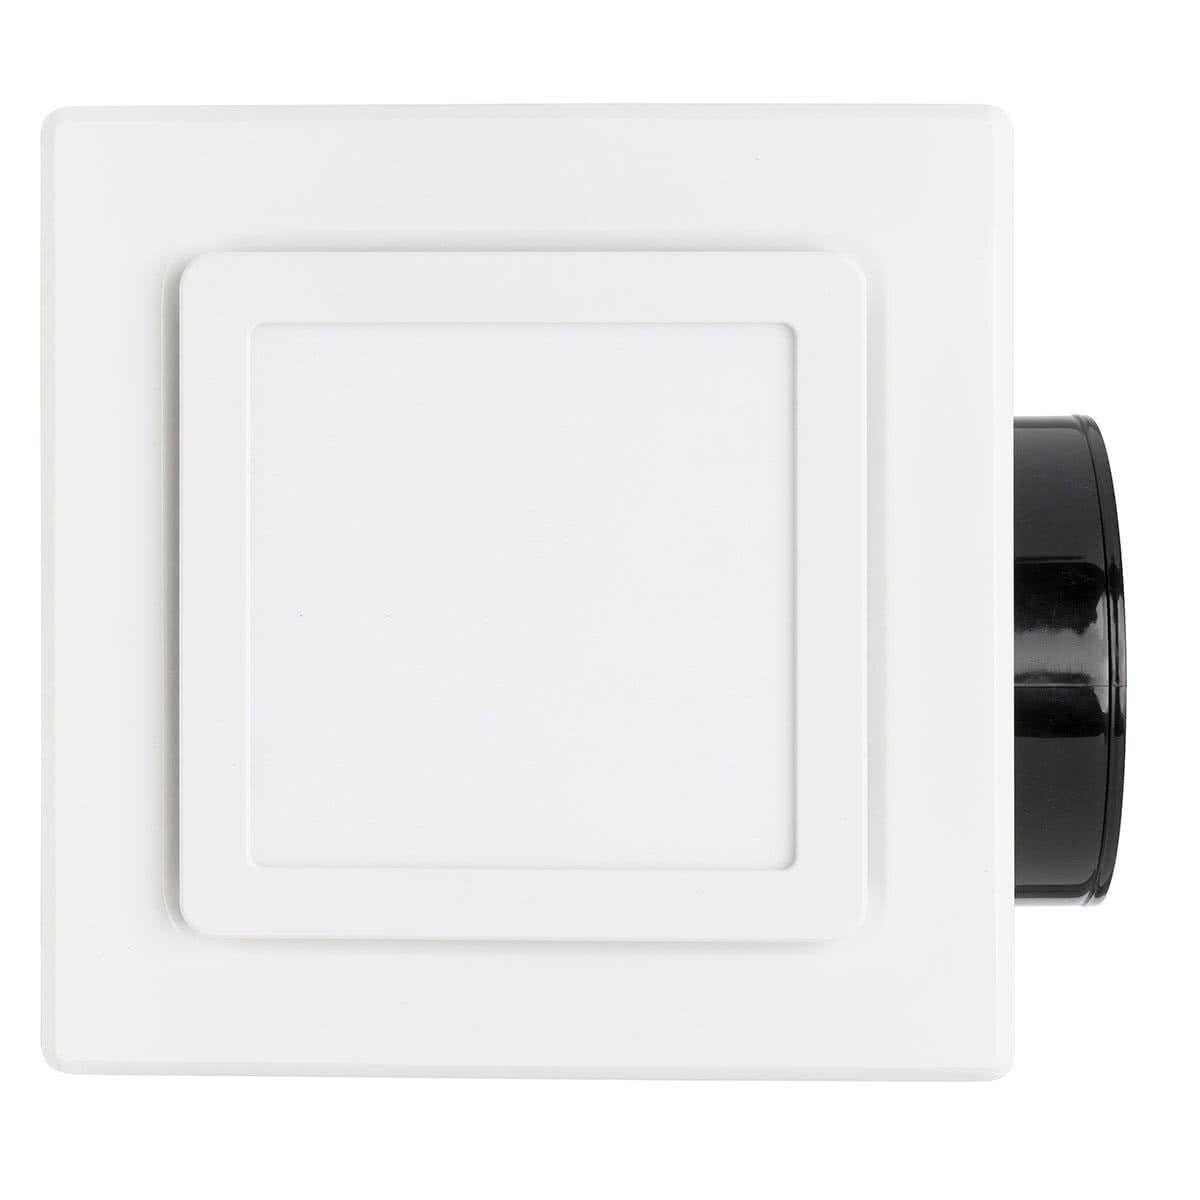 Sarico Large Square Exhaust Fan With 13w LED Light